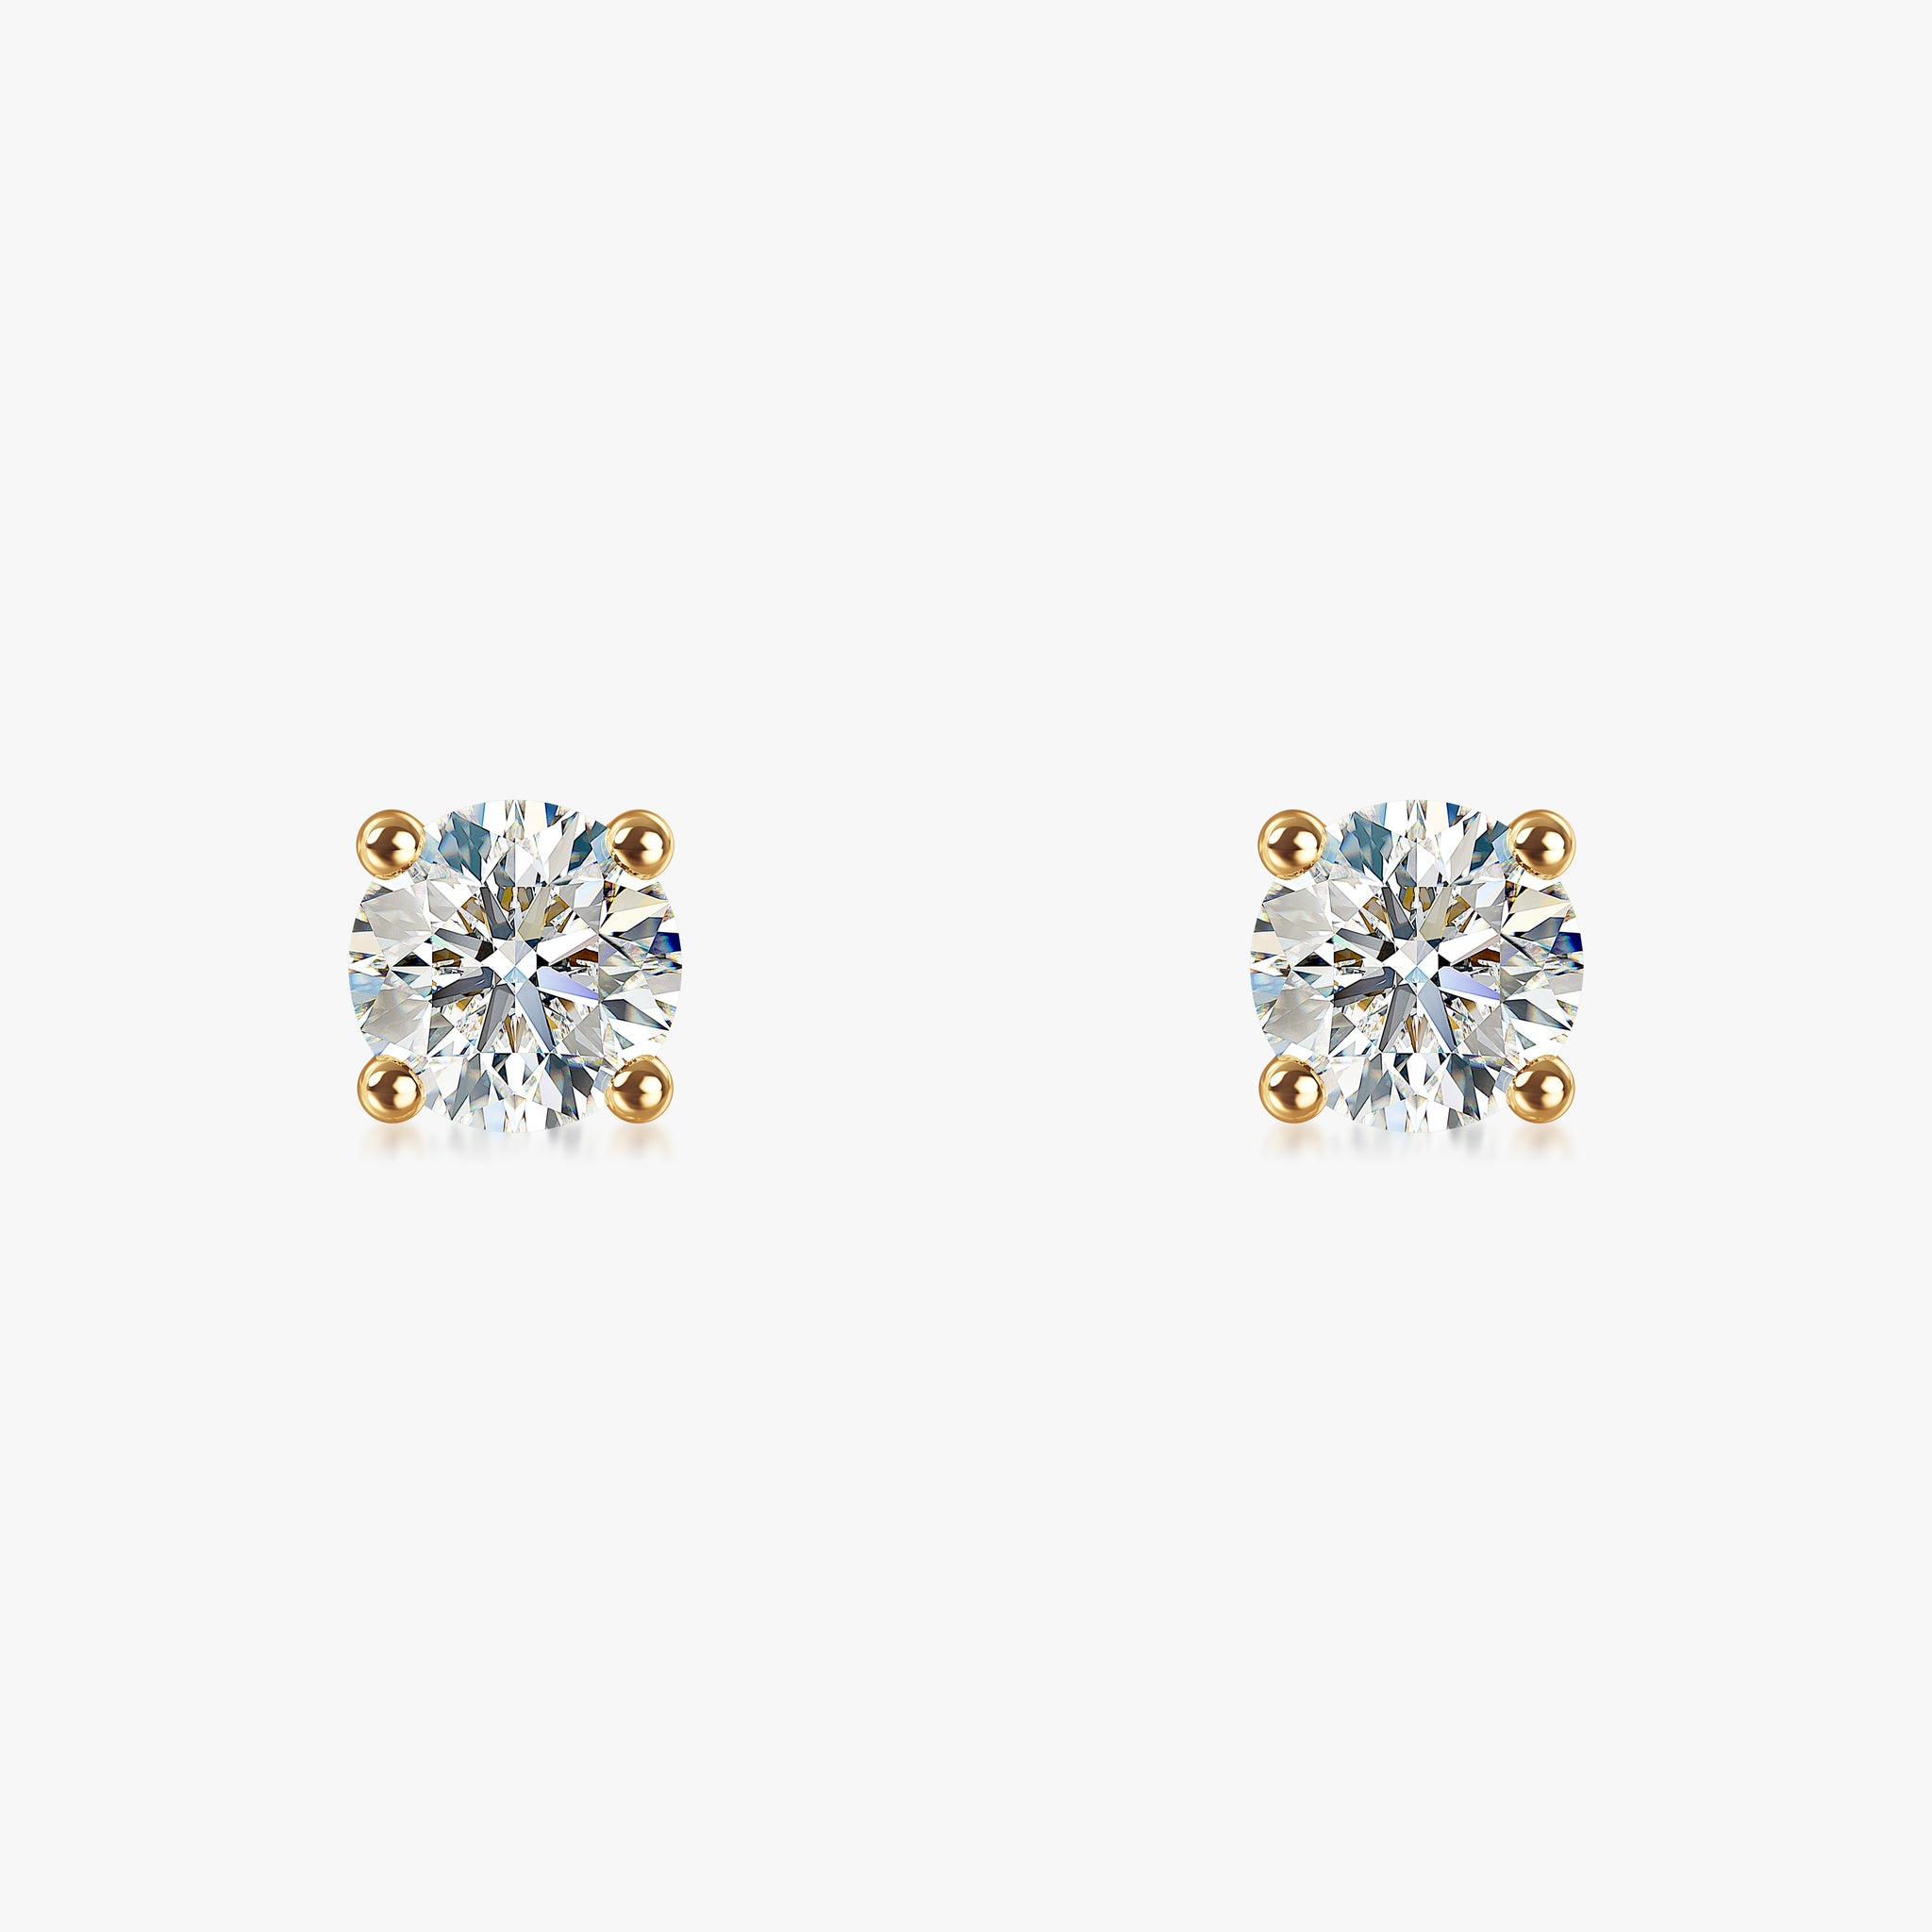 J'EVAR 18KT Yellow Gold ALTR Lab Grown Diamond Stud Earrings with Guardian Backs Front View | Pair / 2.00 CT